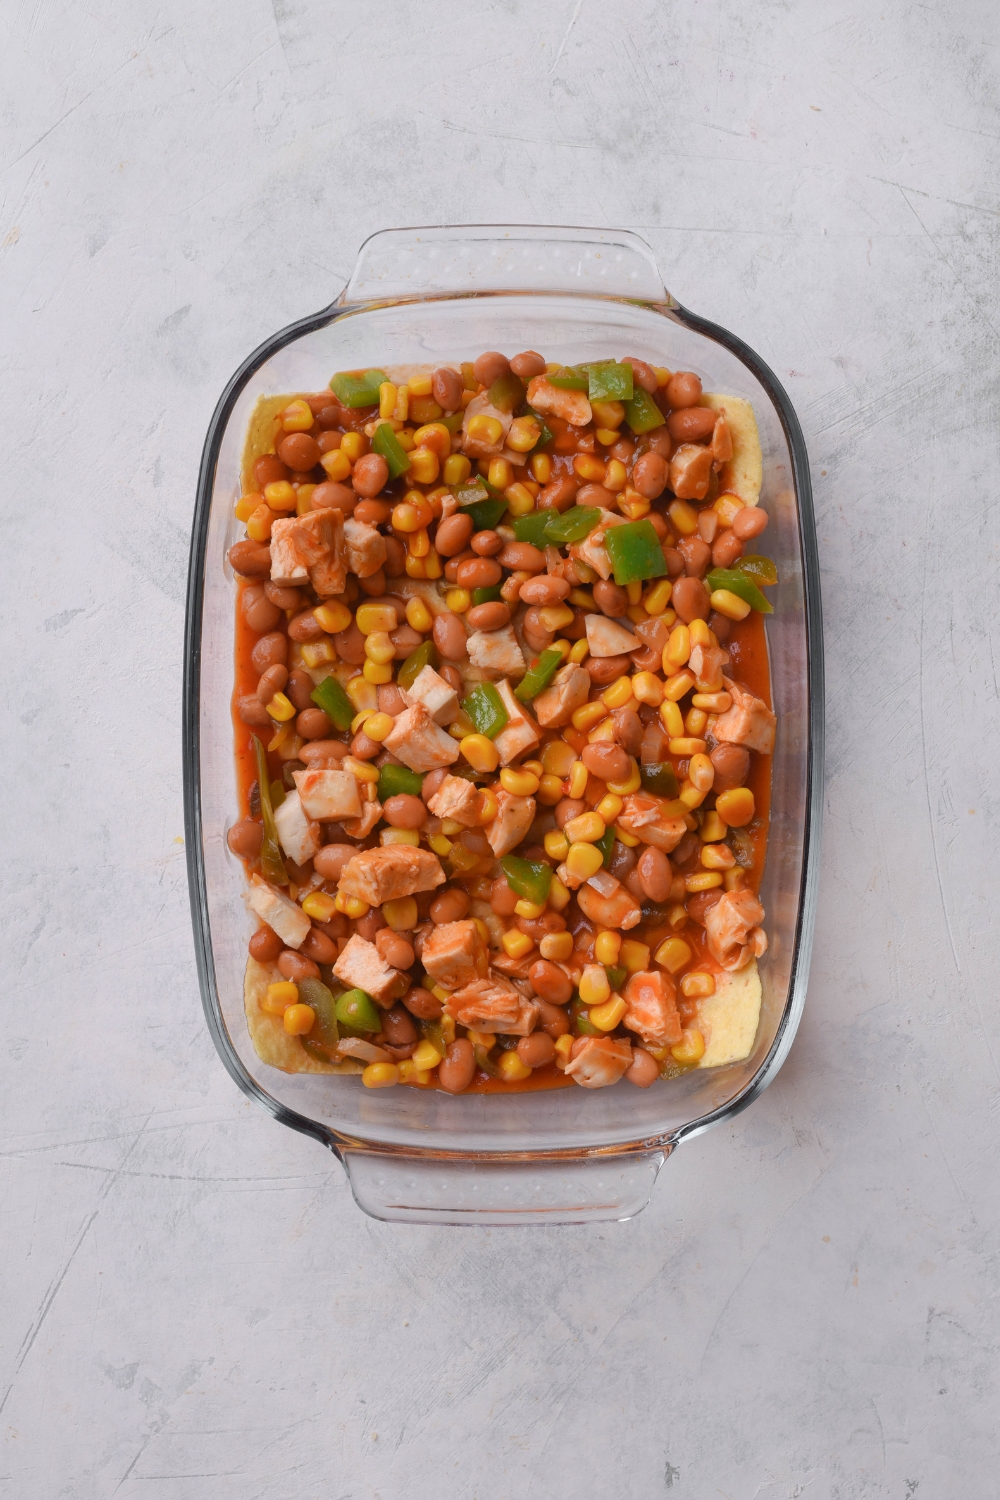 A baking dish filled with pinto beans, diced green peppers, diced onion, corn, and diced chicken in sauce.